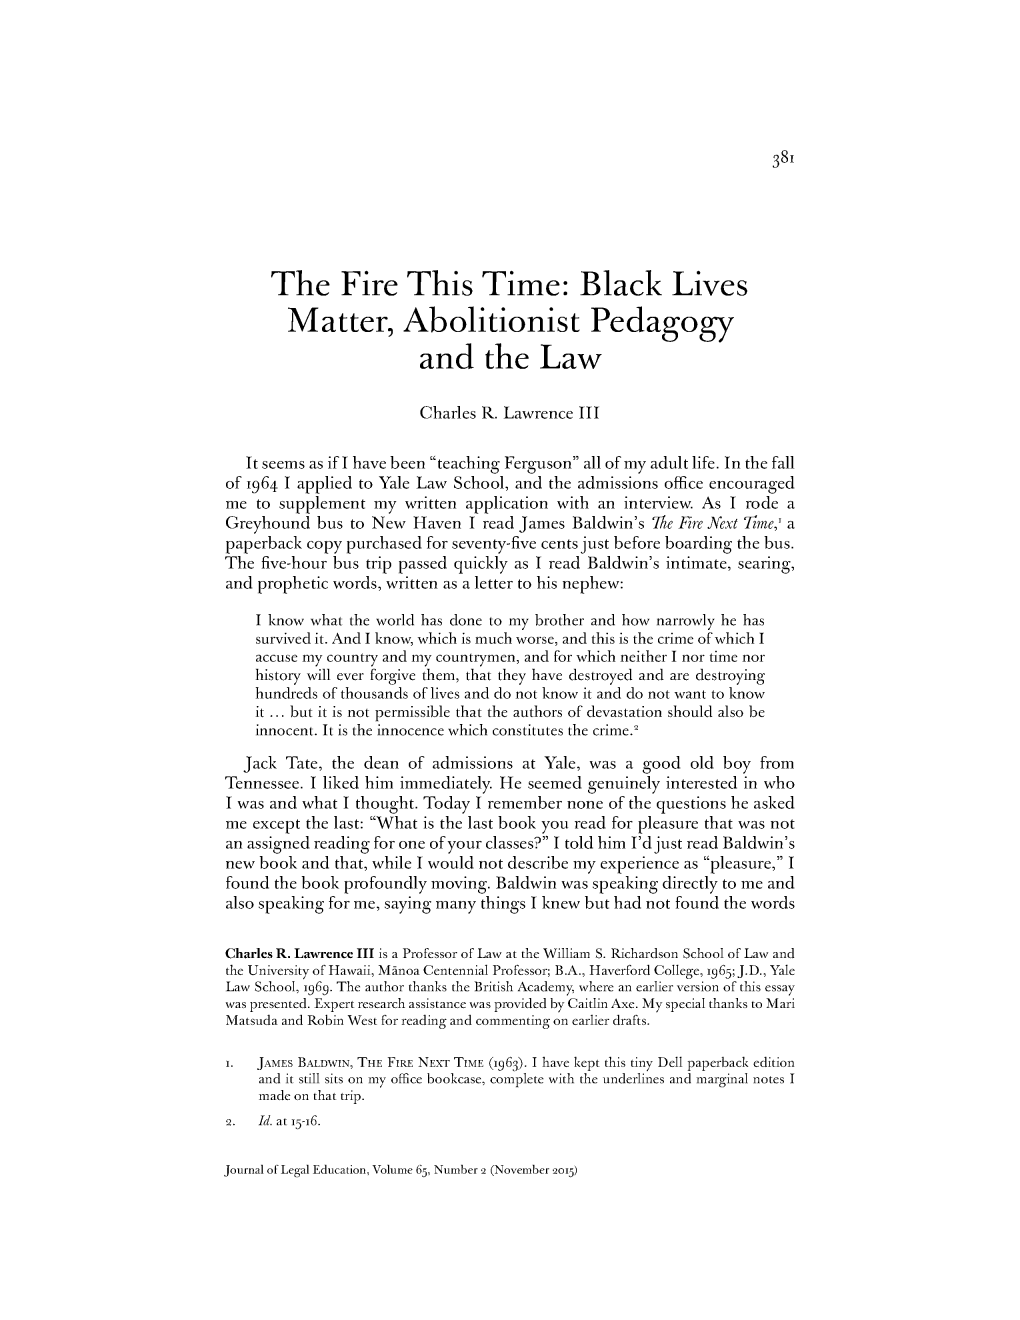 The Fire This Time: Black Lives Matter, Abolitionist Pedagogy and the Law